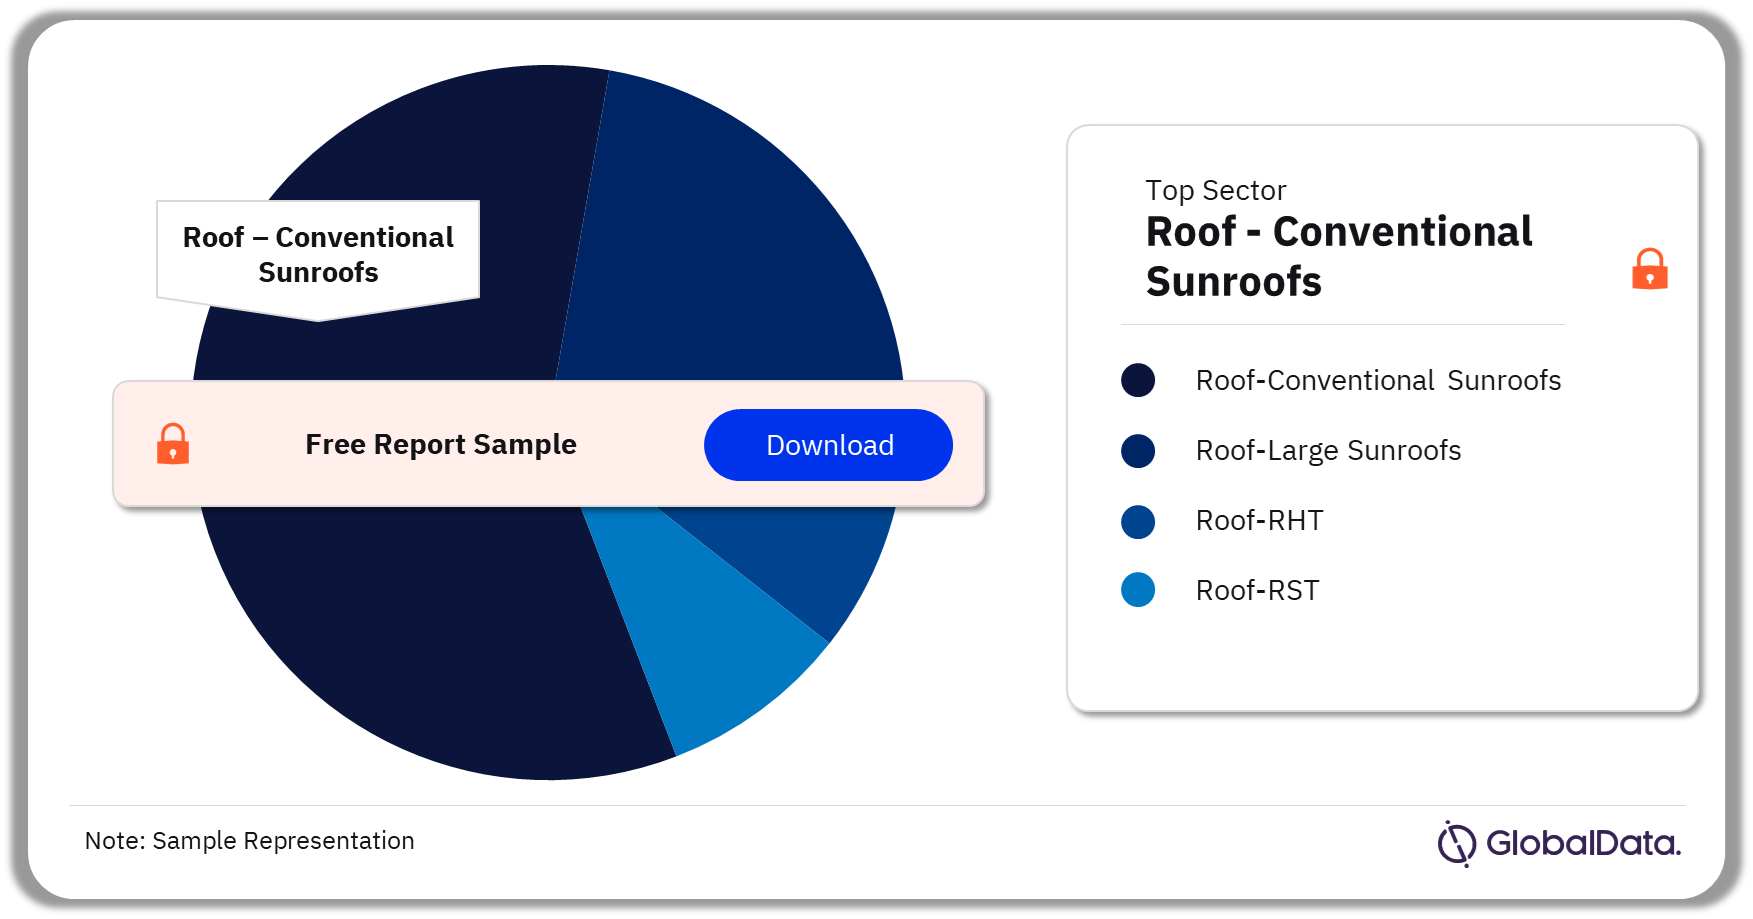 Automotive Roof Systems Market Analysis by Sectors, 2023 (%)